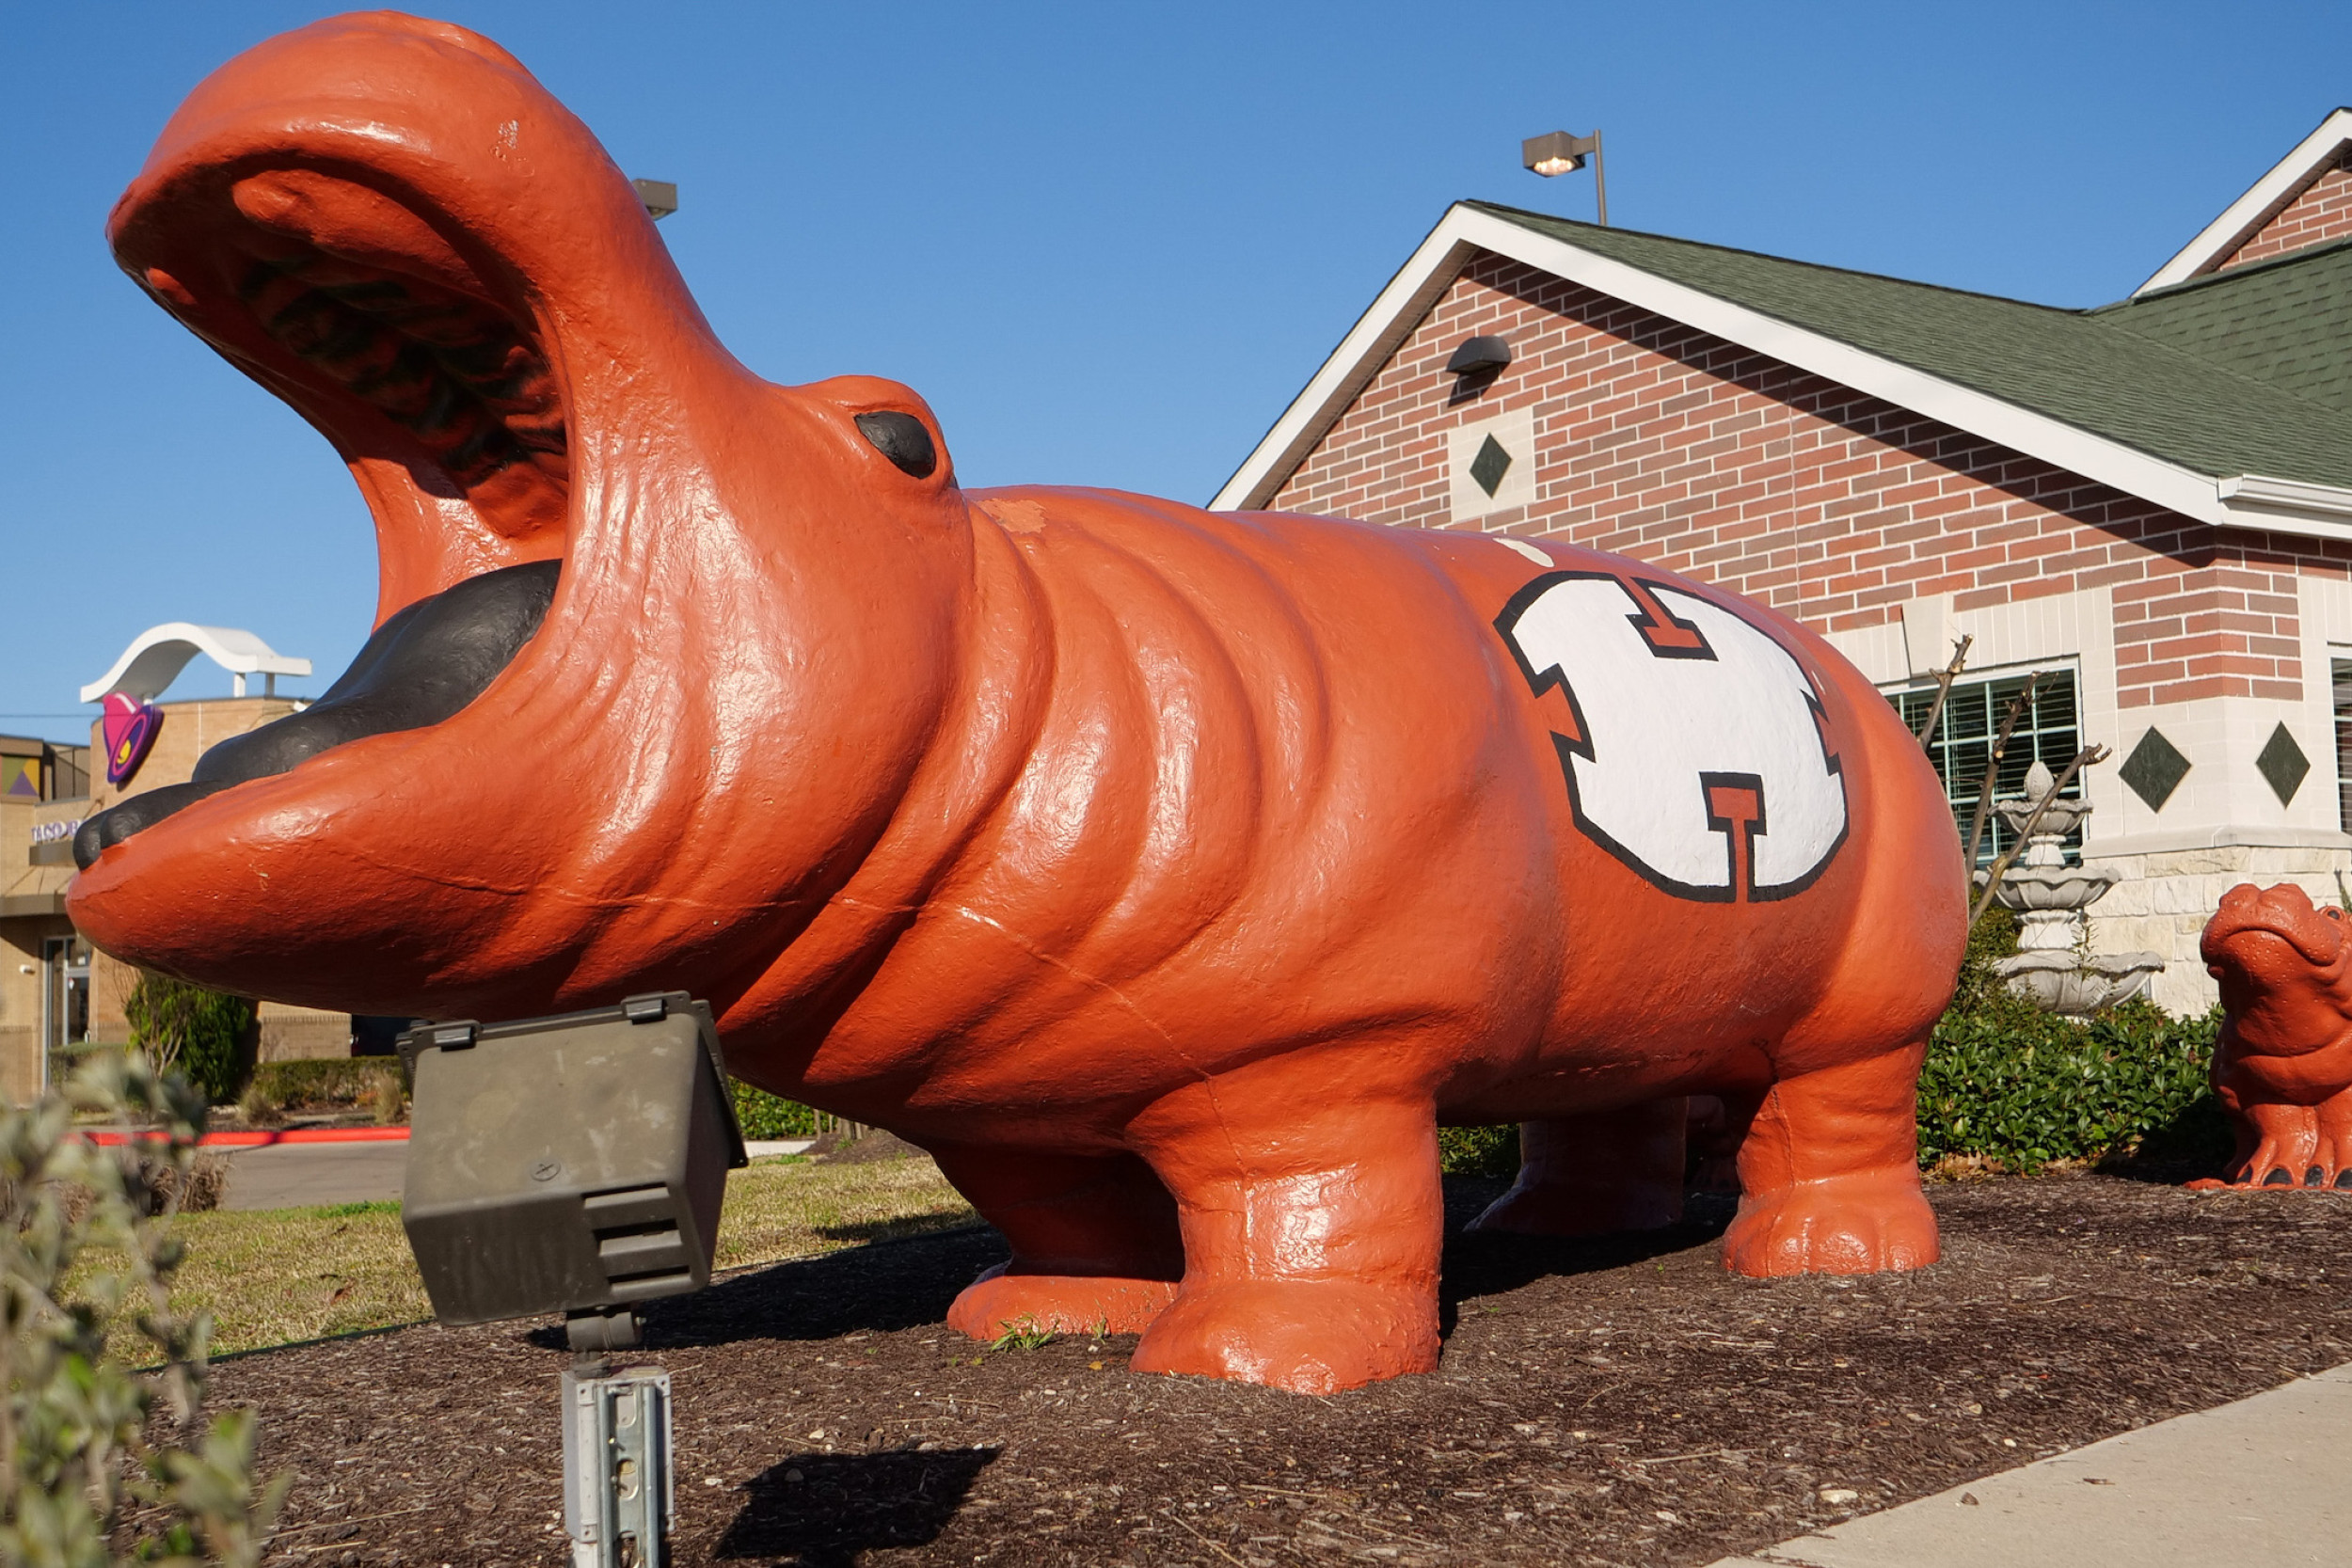 Photo of an orange hippo with the Hutto Hippo logo painted on its side.